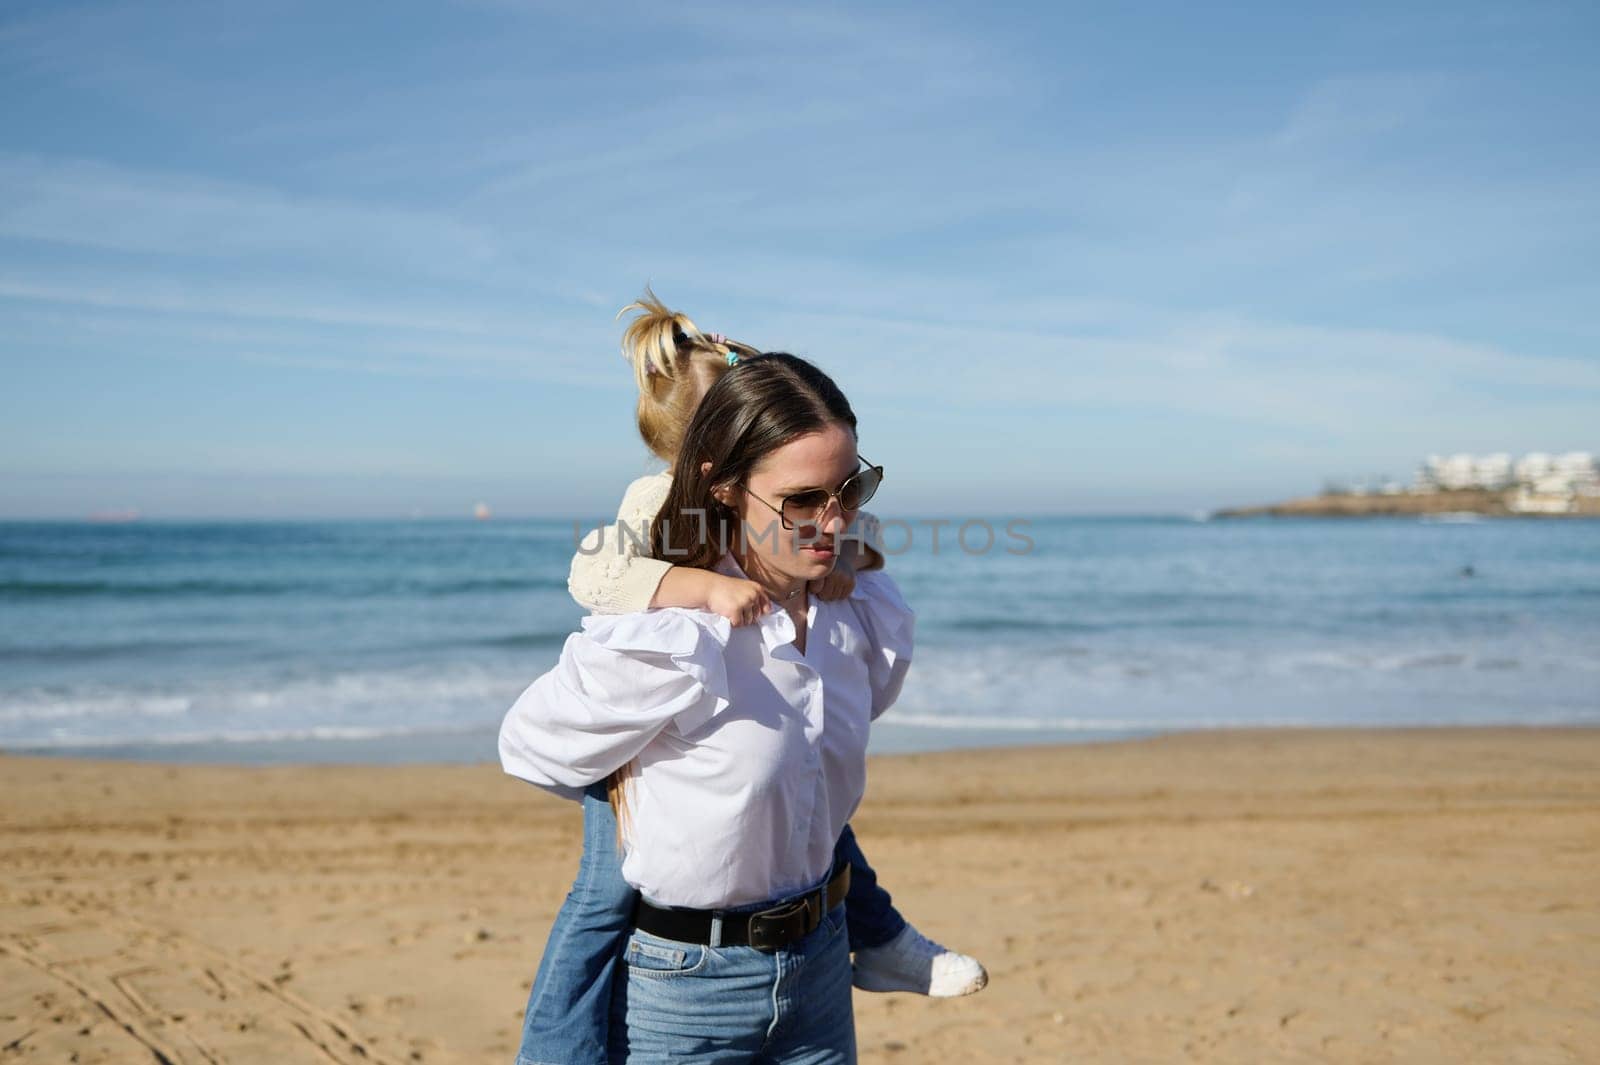 Caucasian young woman, mother in white l shirt, blue jeans and sunglasses, carrying her little daughter on her back, walking on the sandy beach along the beautiful waves breaking on the Atlantic shore